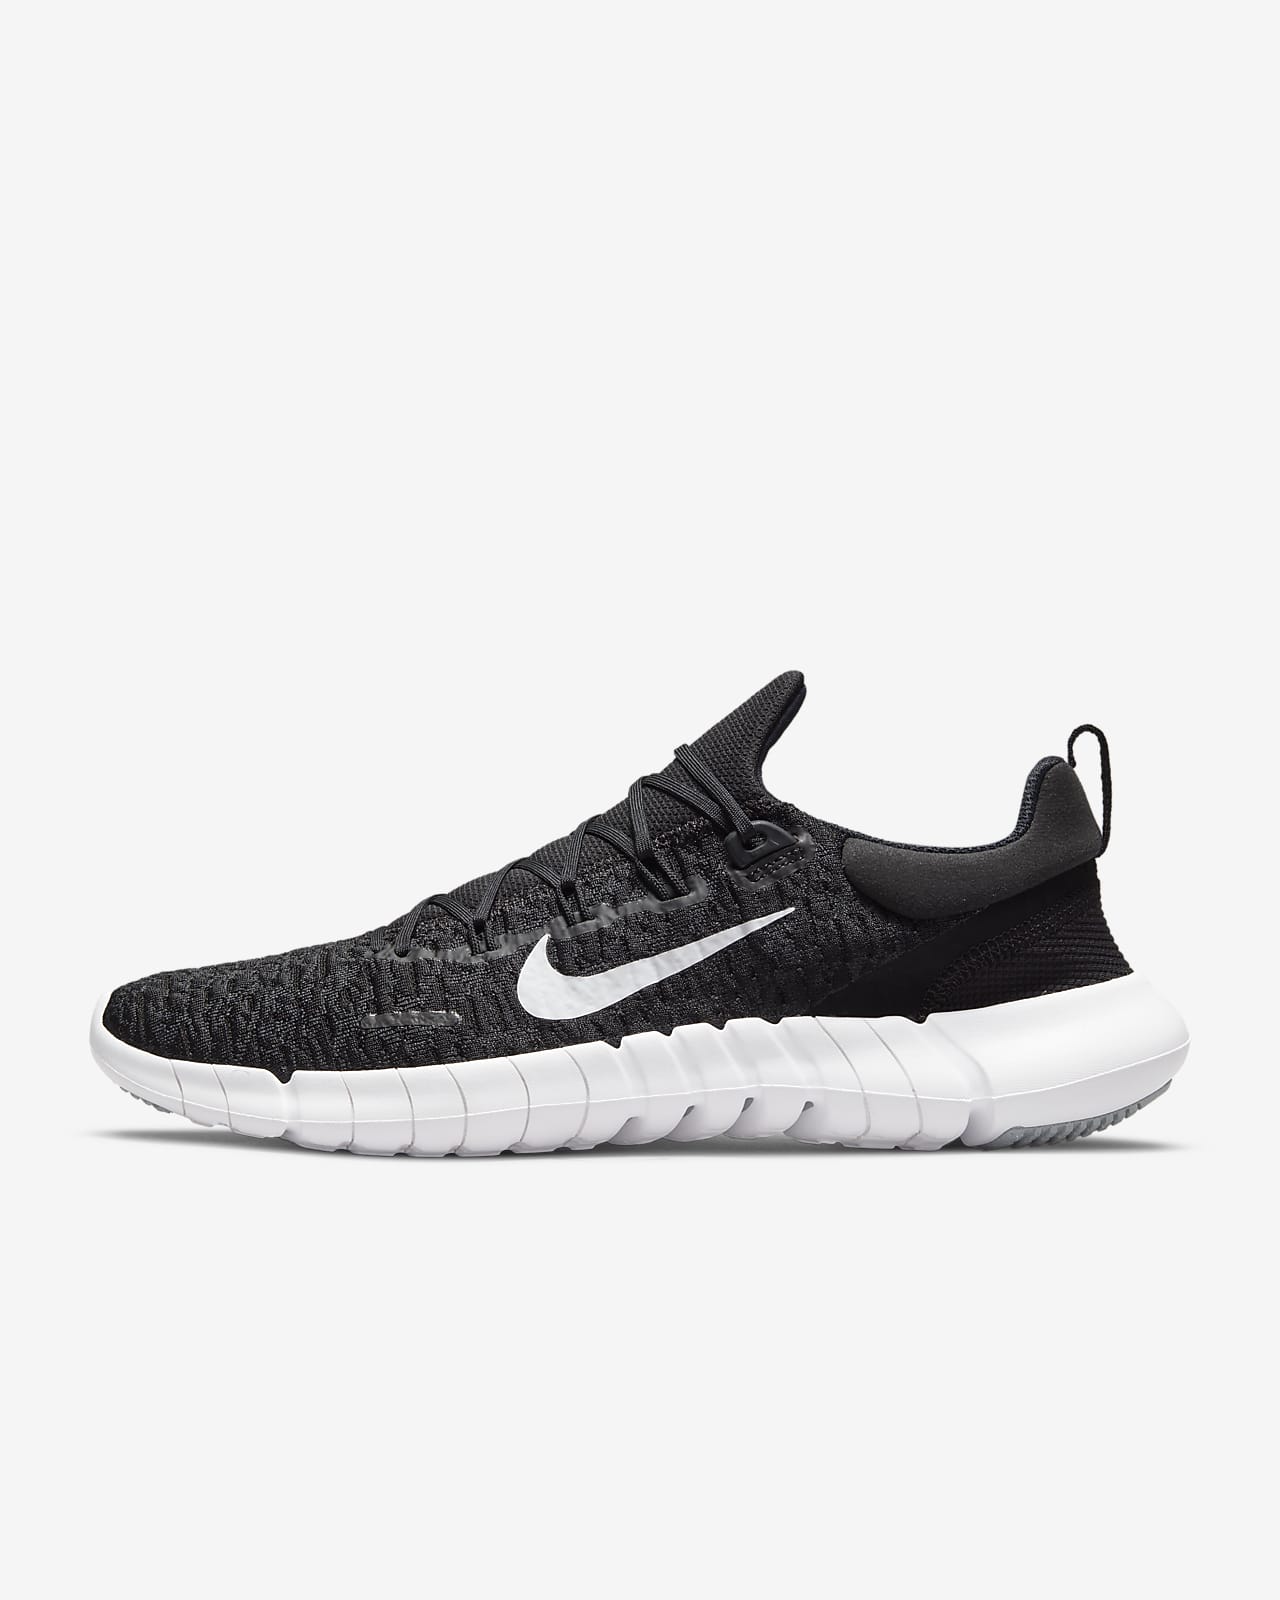 Chaussures de running Nike Free Run 5.0 pour Homme